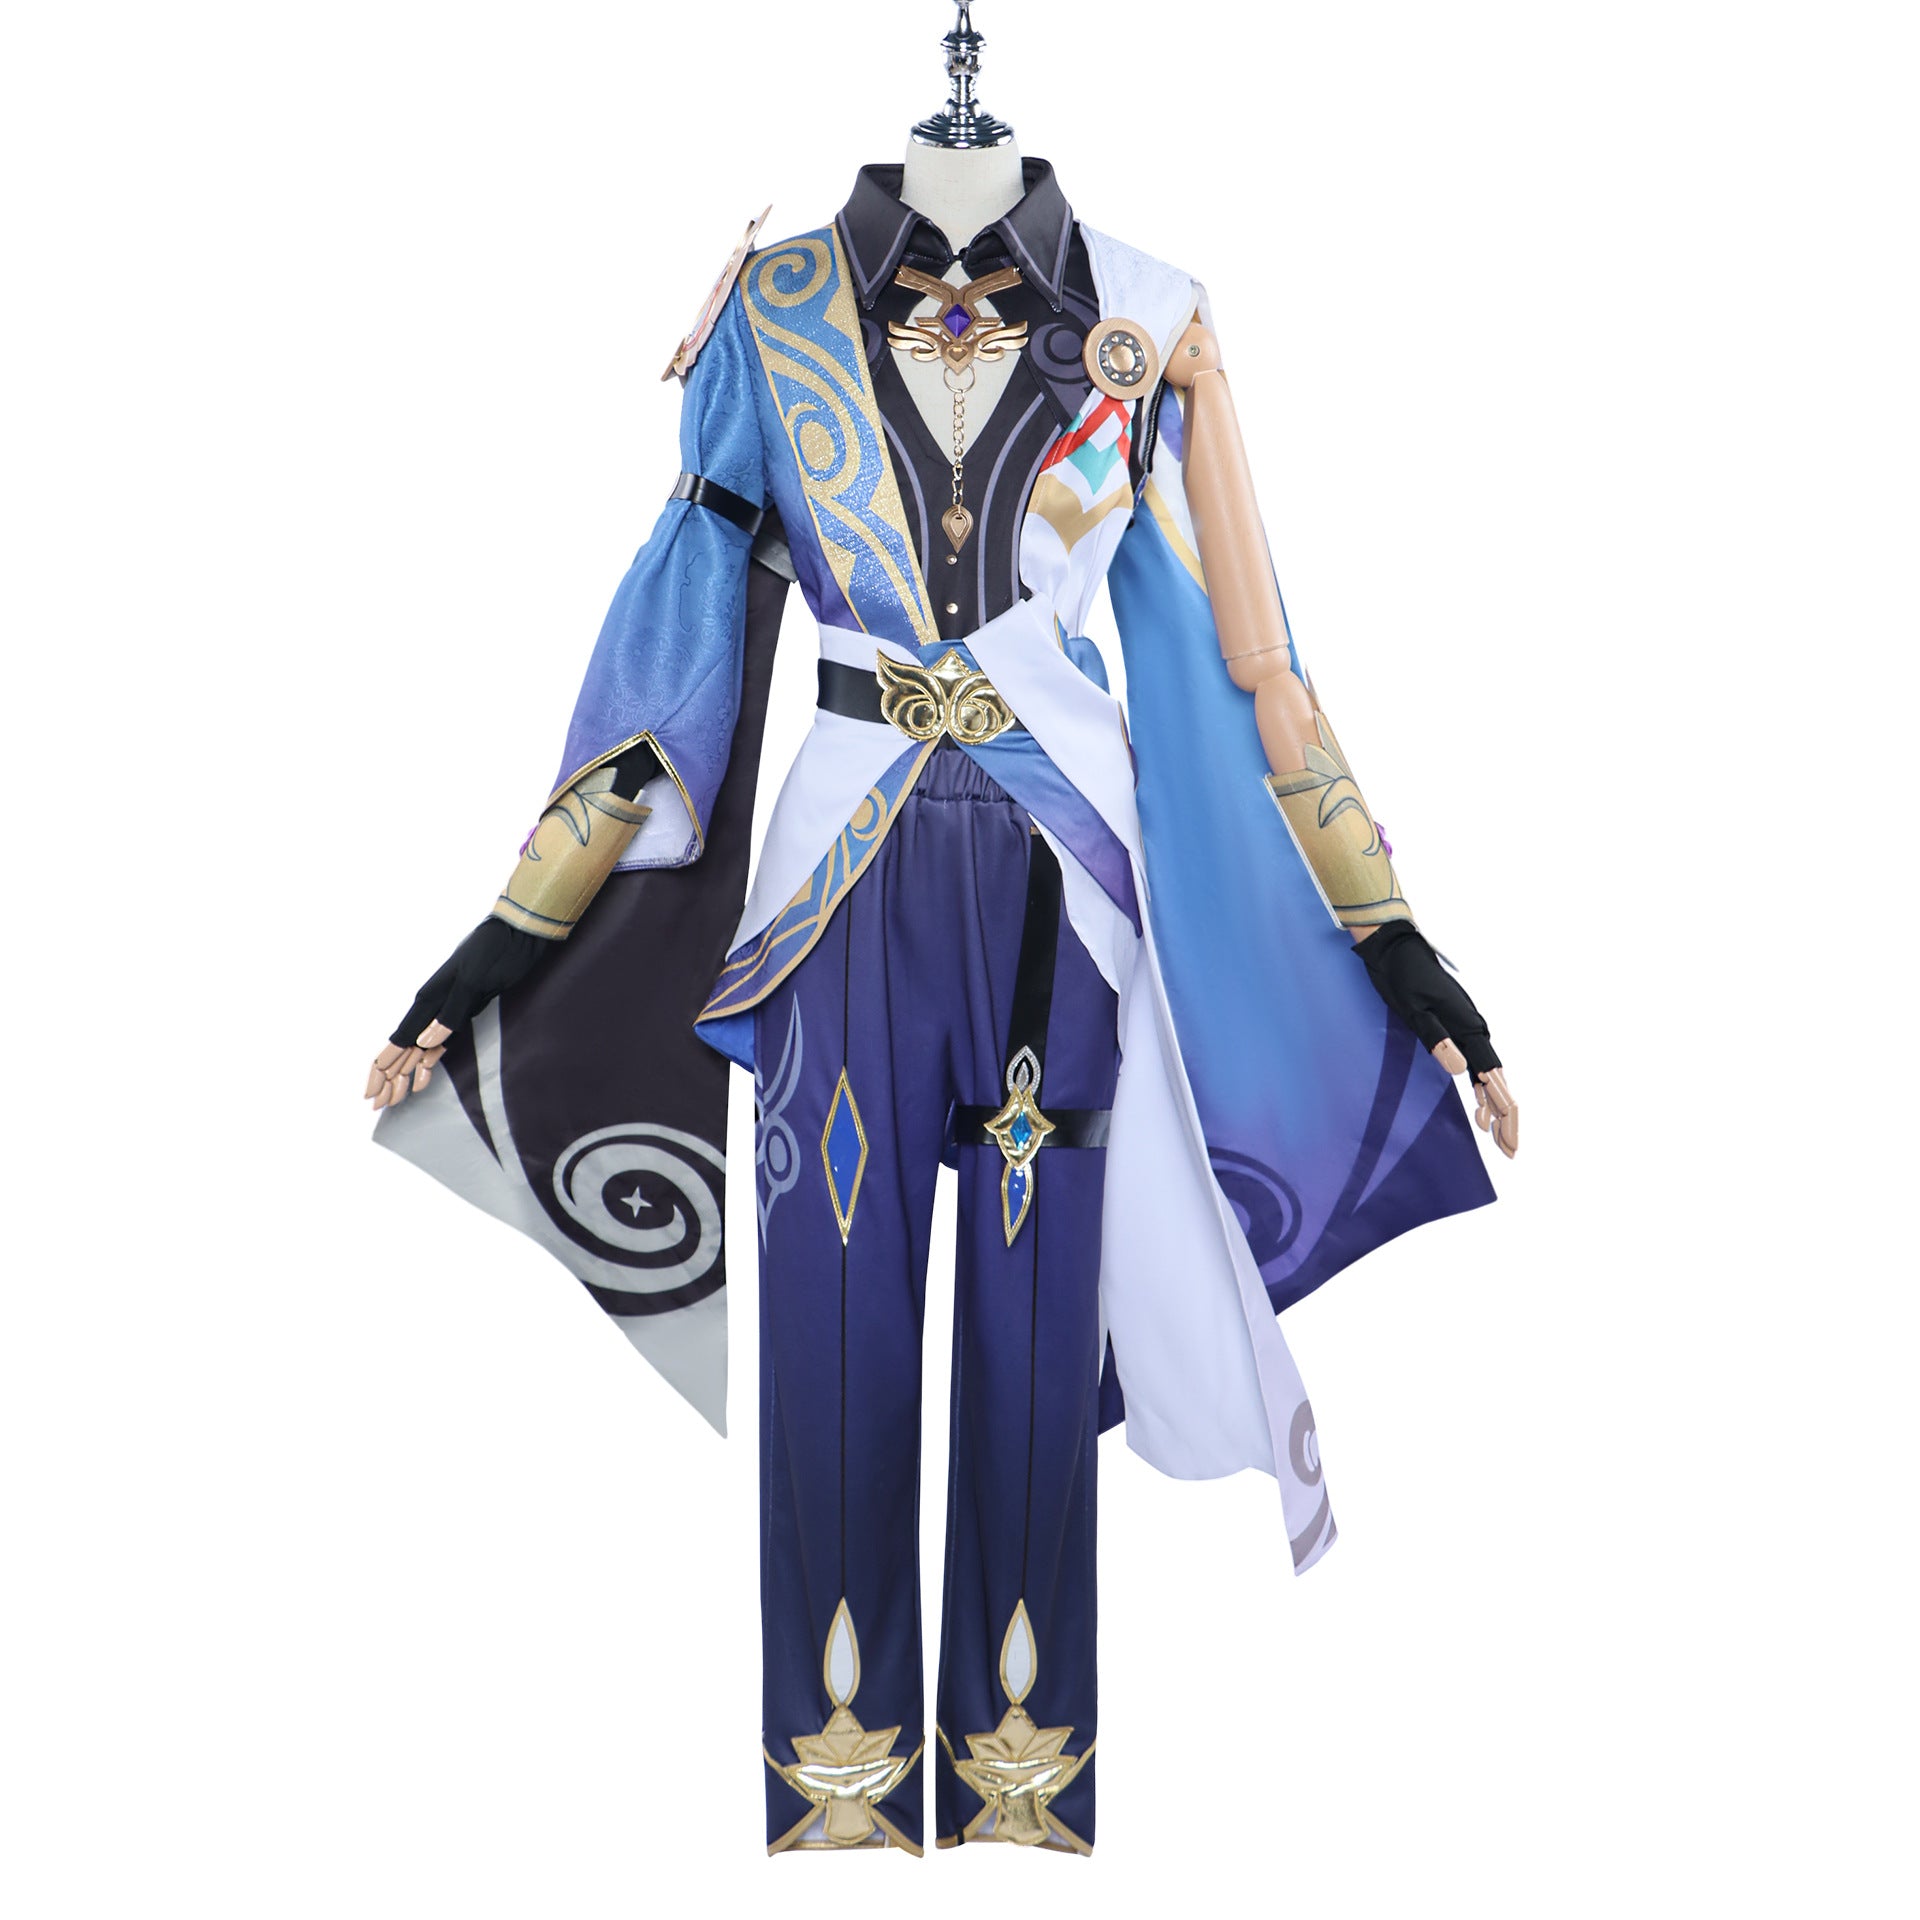 Rulercosplay Honkai Star Rail Veritas Ratio Uniform Suit Cosplay Costume With Accessories For Halloween Party